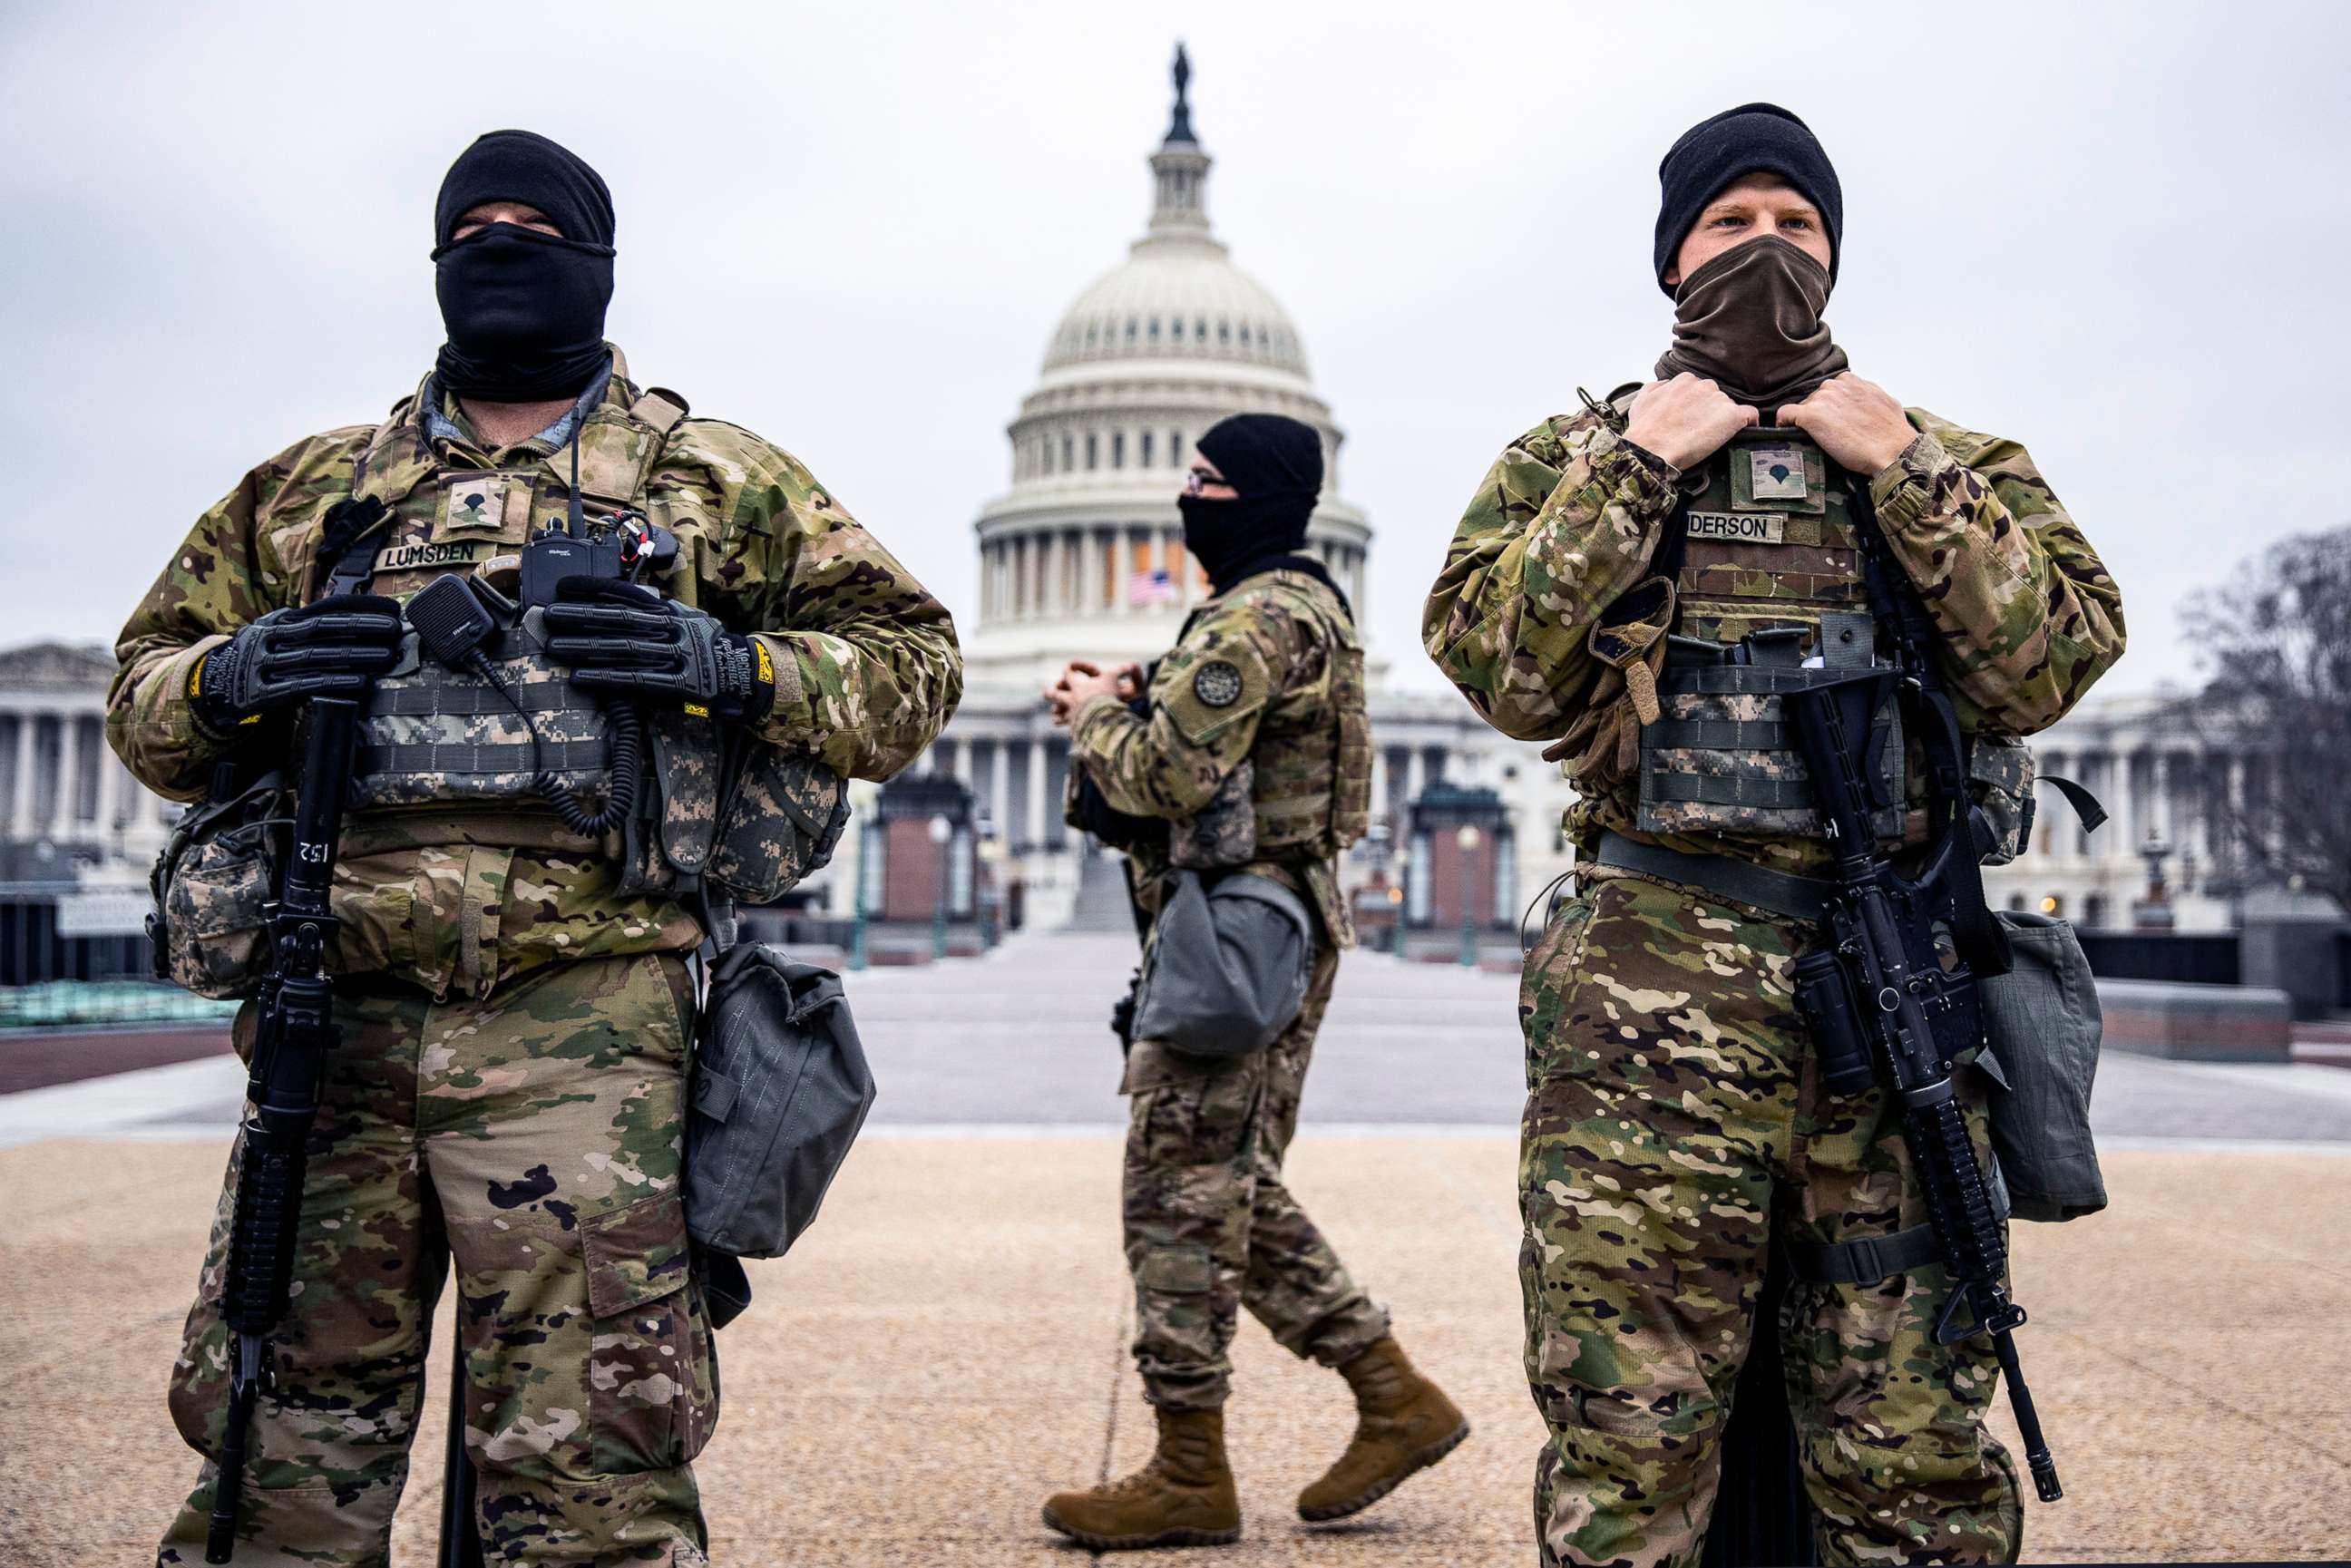 PHOTO: National Gaurd members patrol the U.S. Capitol on Feb. 13, 2021 in Washington, D.C., during the final day of the impeachment hearing of former President Donald Trump.